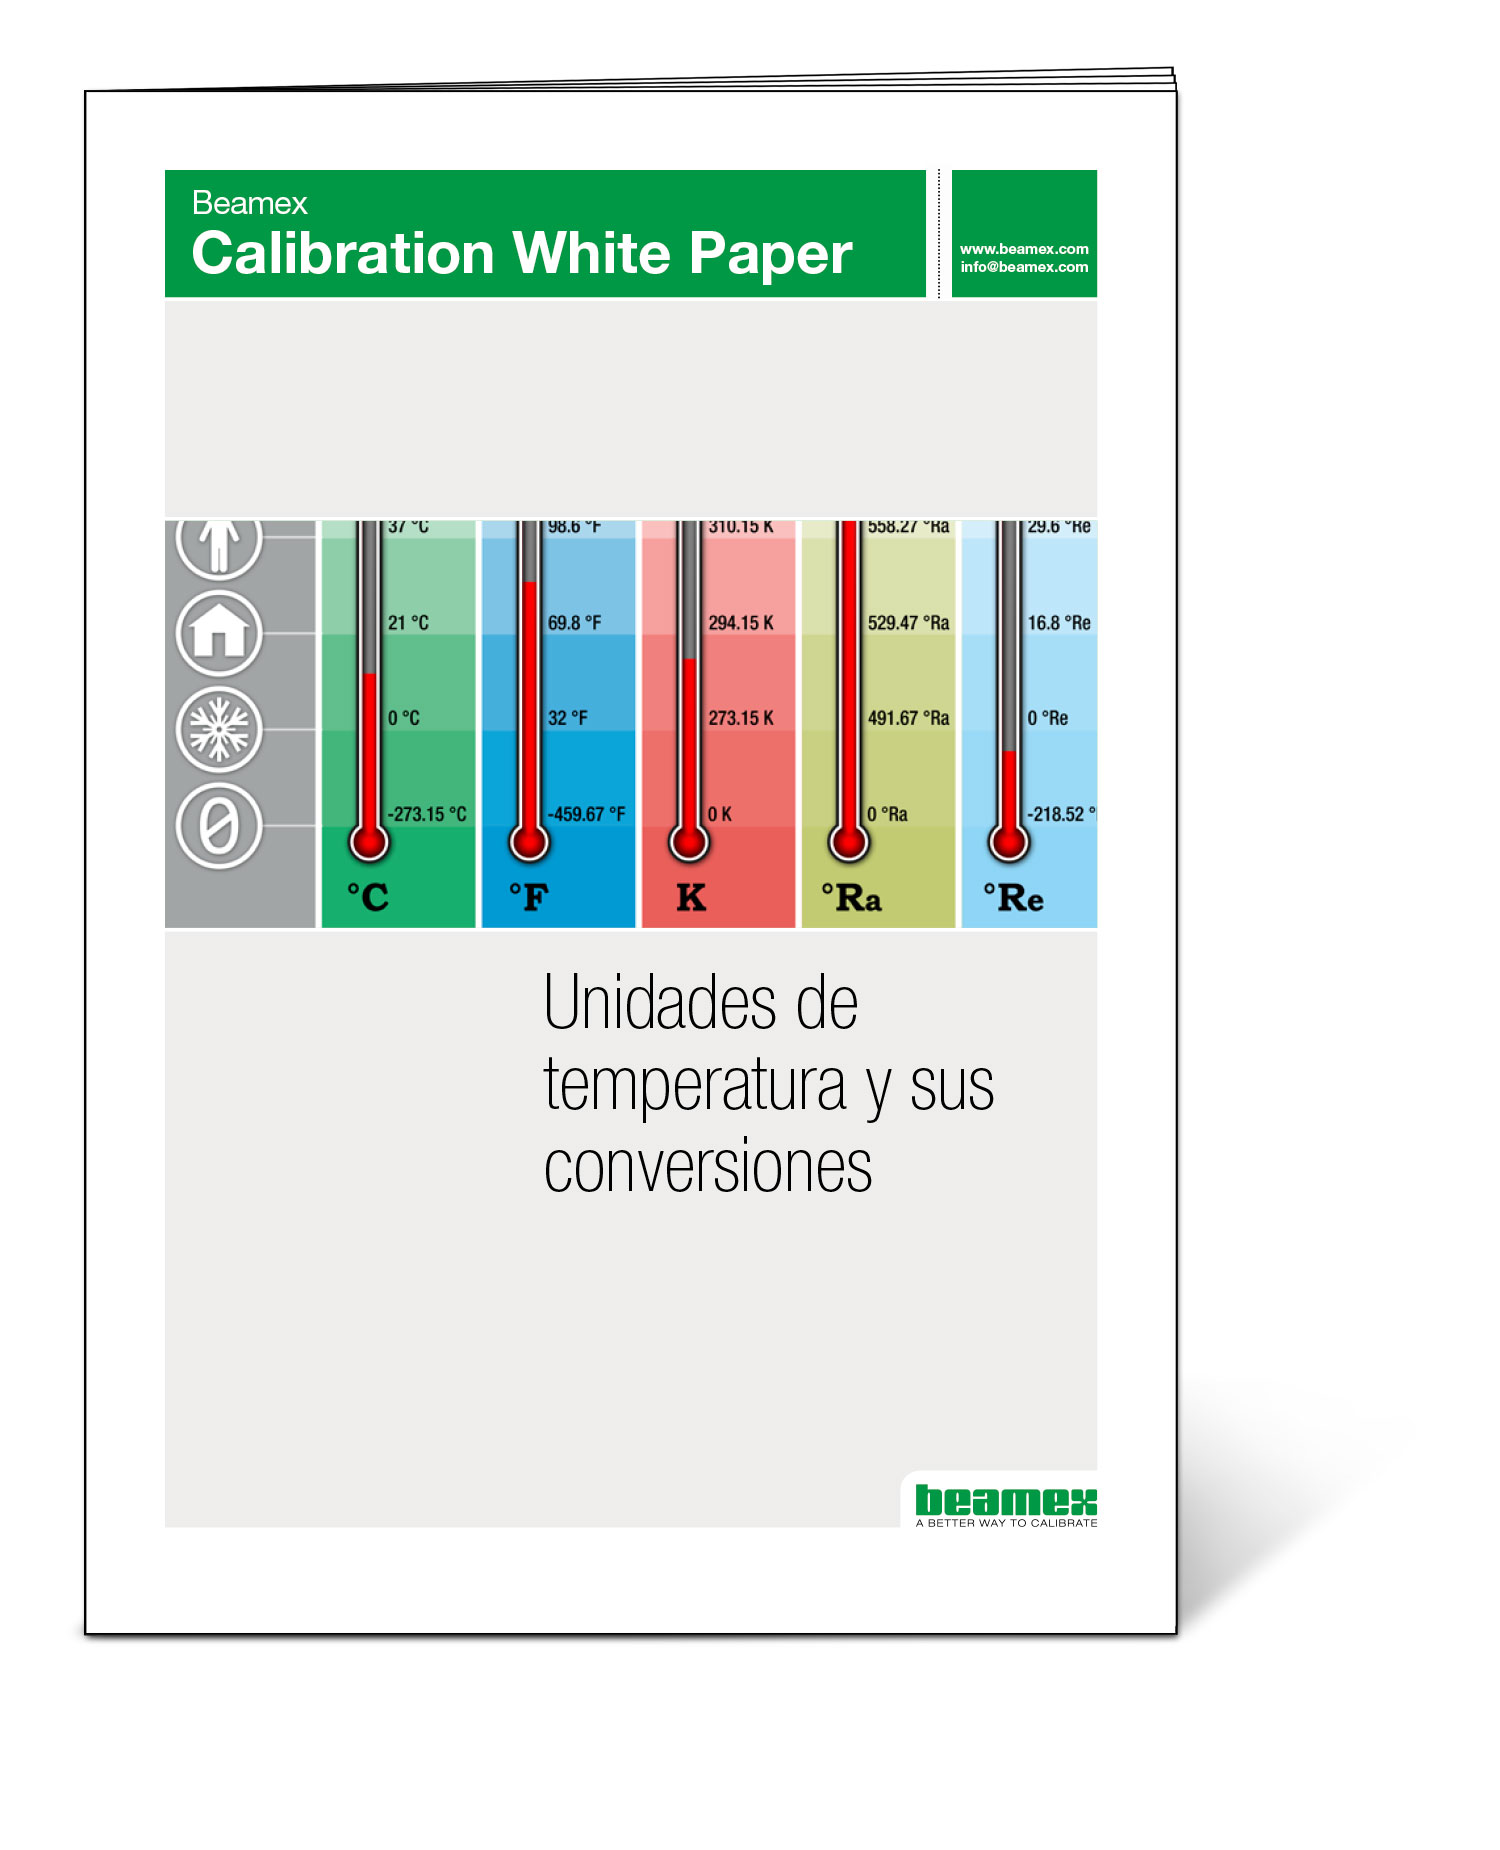 https://2203666.fs1.hubspotusercontent-na1.net/hubfs/2203666/Beamex_images/White%20Paper%20covers/Beamex-WP-Temperature-units-and-conversions-1500px-v1_ESP-1.jpg